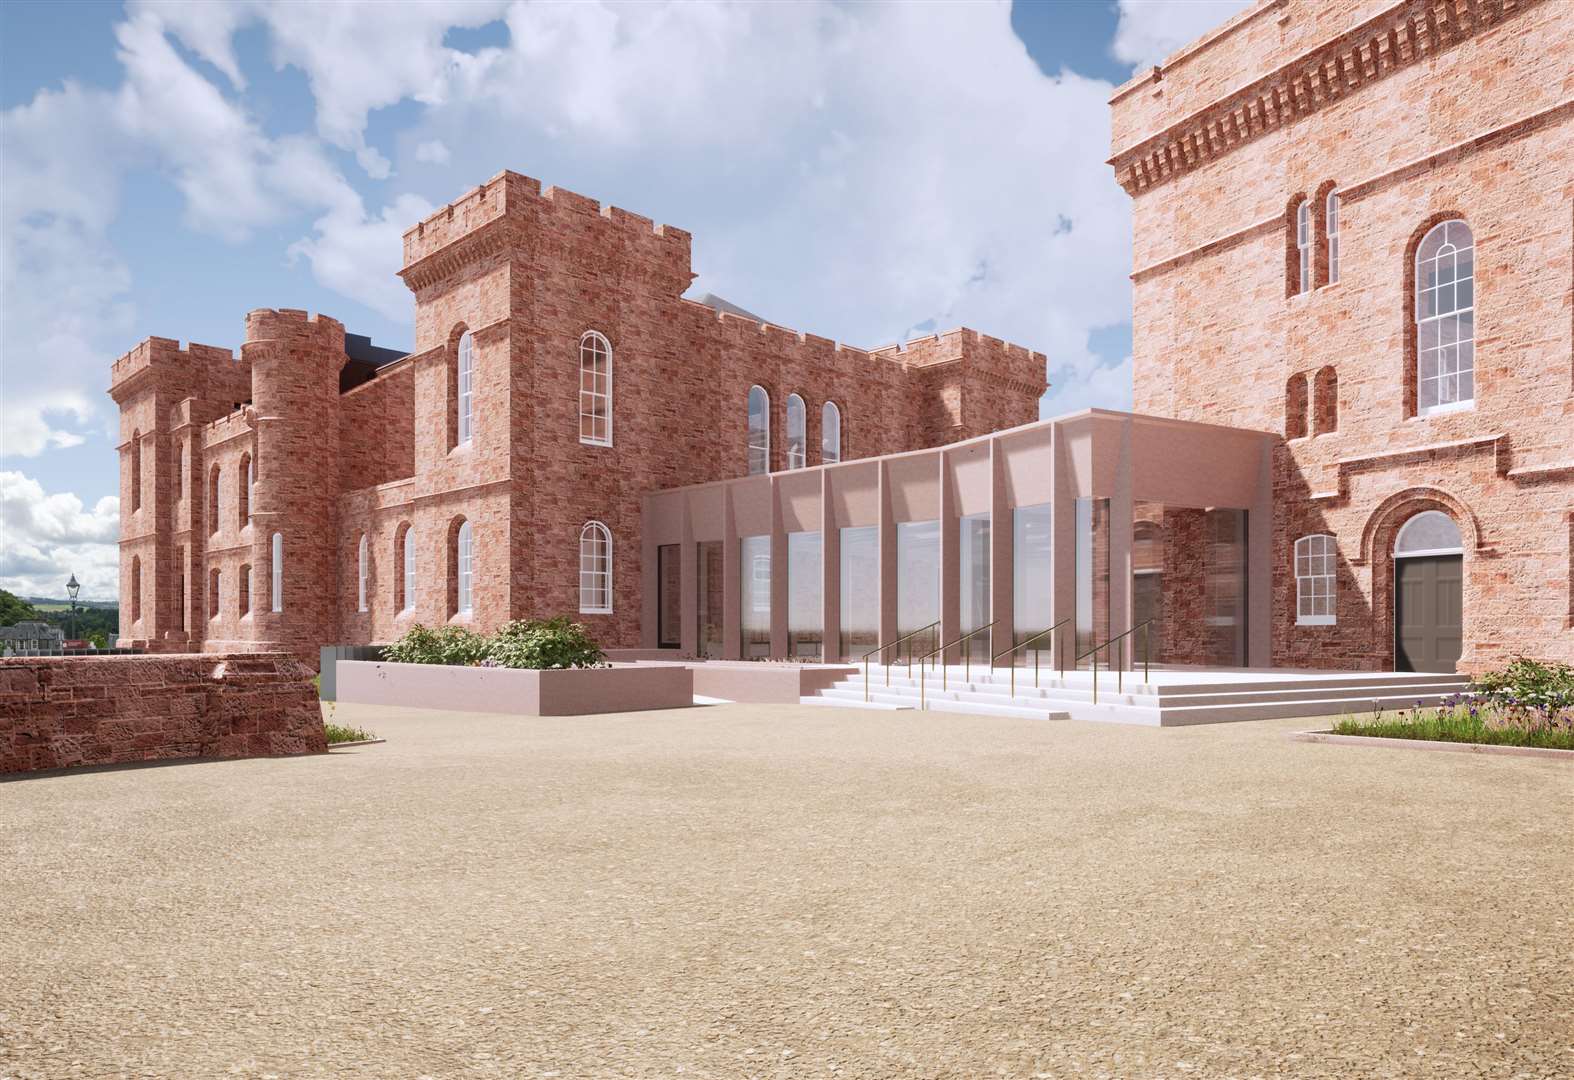 Exterior of the Inverness Castle building, showing proposed new building linking the two towers, viewed from the east.